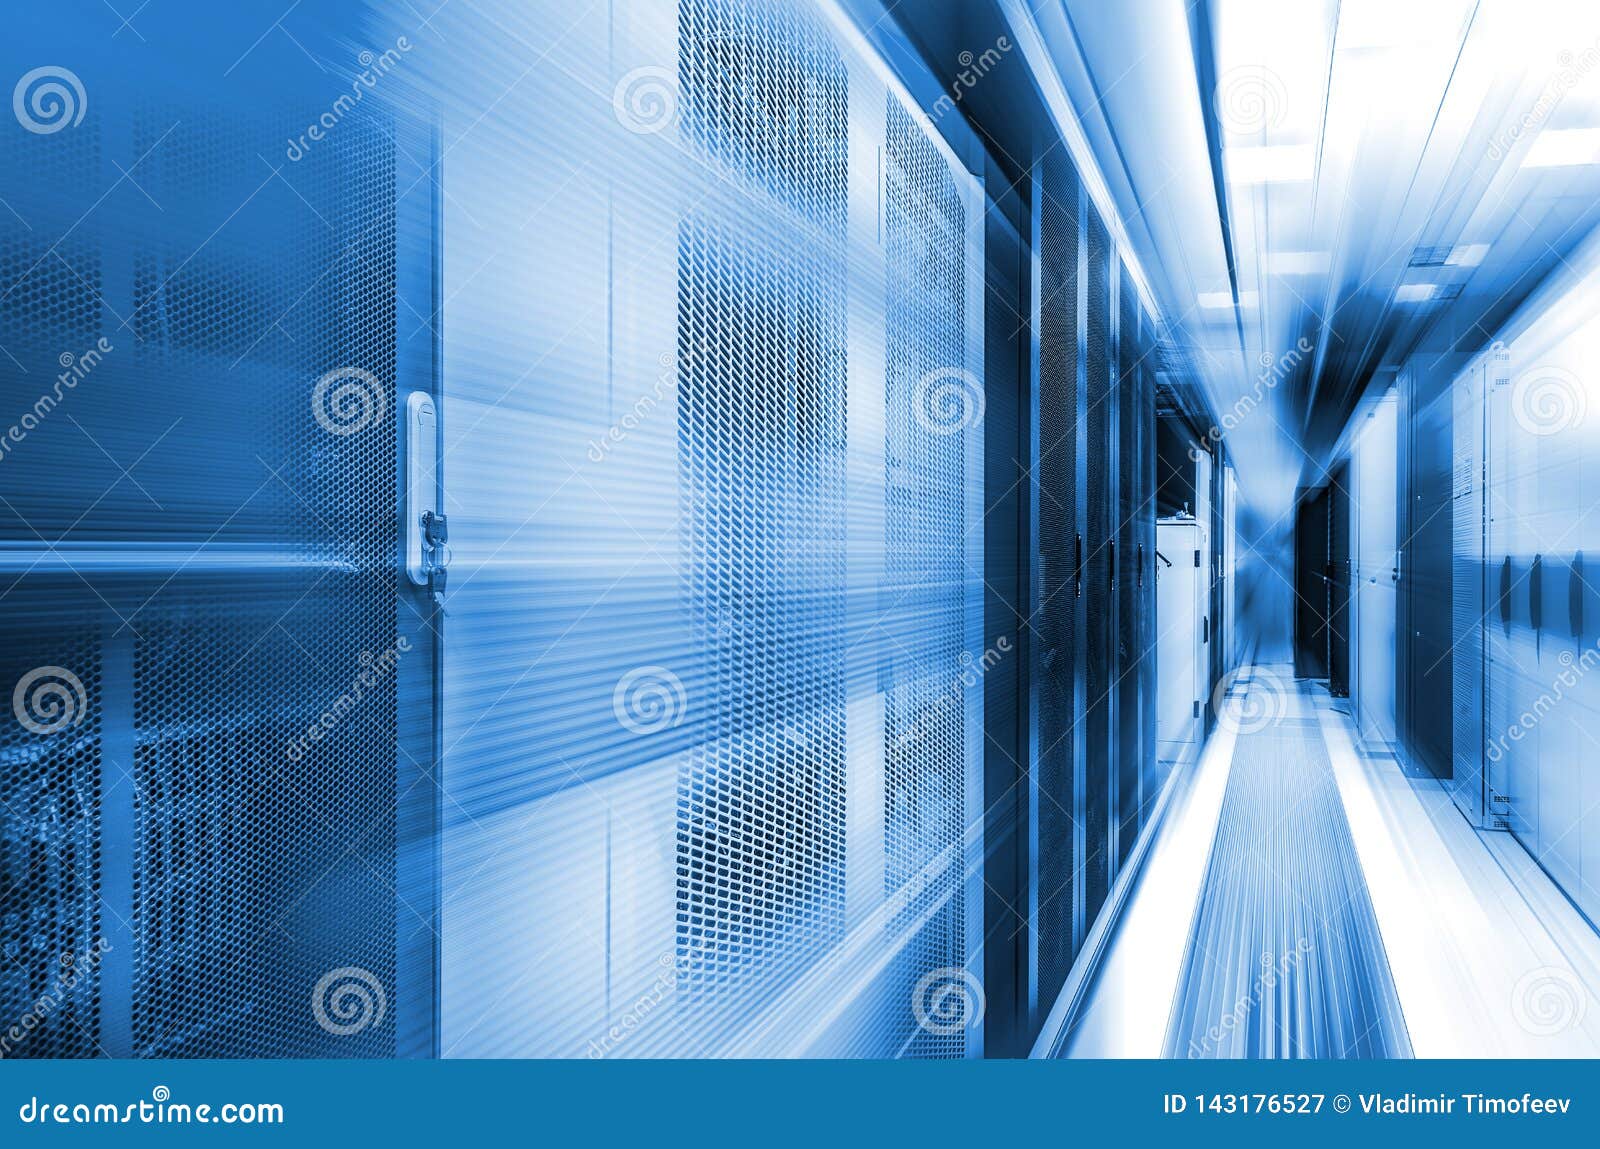 concept of high-speed computing of modern computing technologies and data centers. server room with flow tracers on top